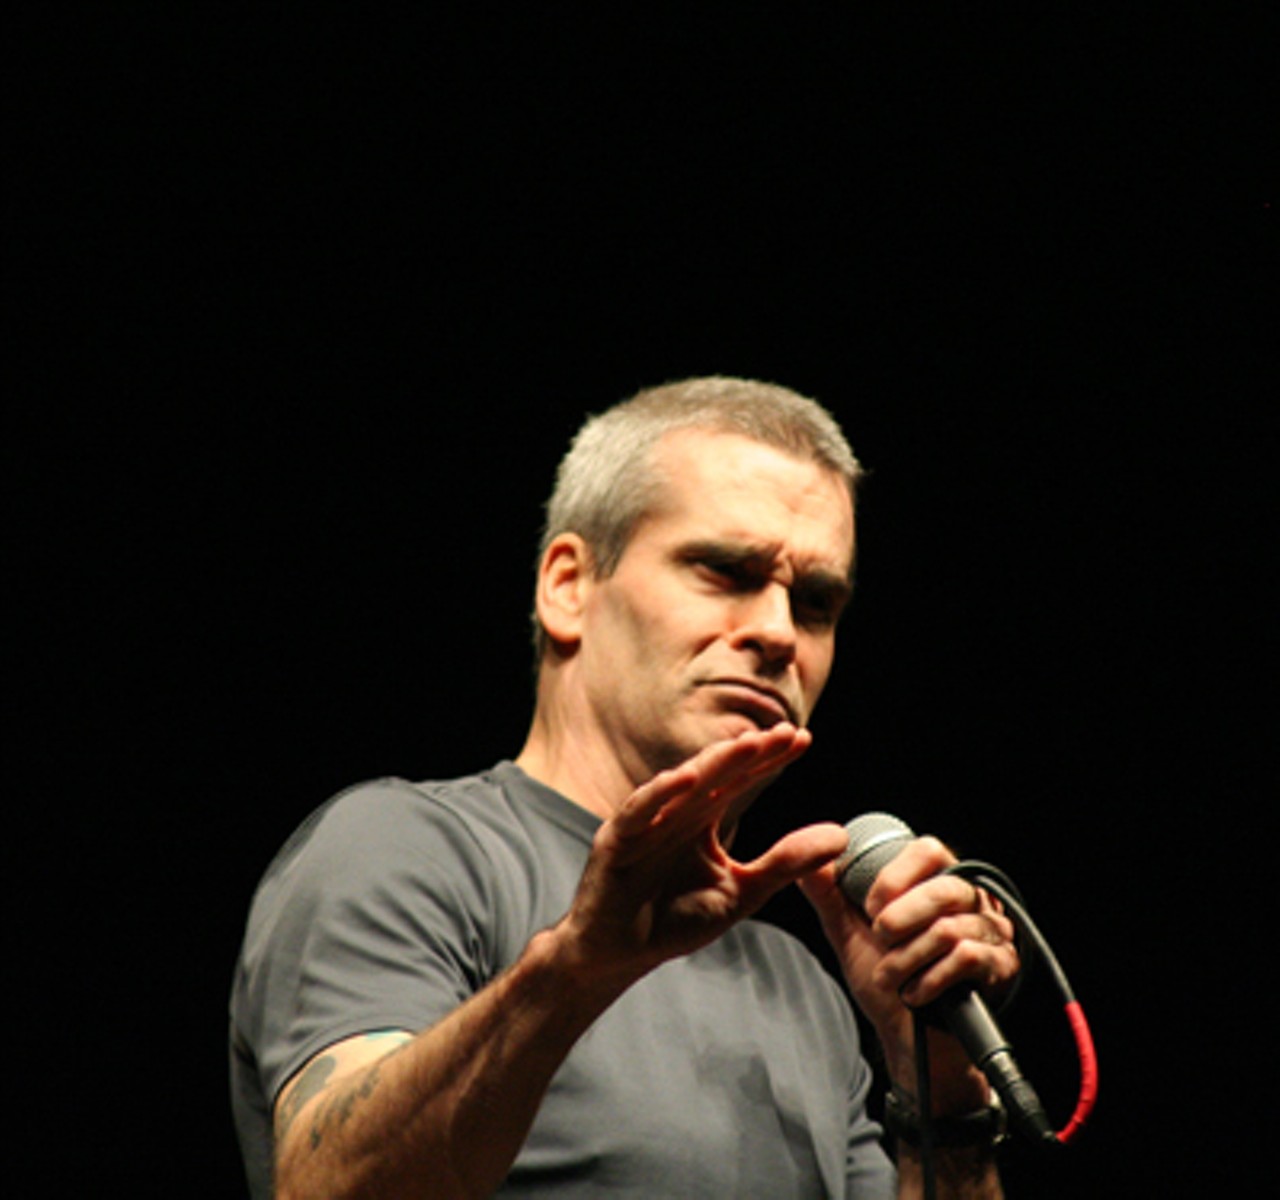 Robot Rollins. 
Read a recap of Rollins' spoken word performance in A to Z.
Read an interview with Rollins in this week's edition, "Get in the Van: Henry Rollins &mdash; musician, spoken-word artist, writer and punk legend &mdash; talks about life on the road.". 
We also posted outtakes from that interview in A to Z.